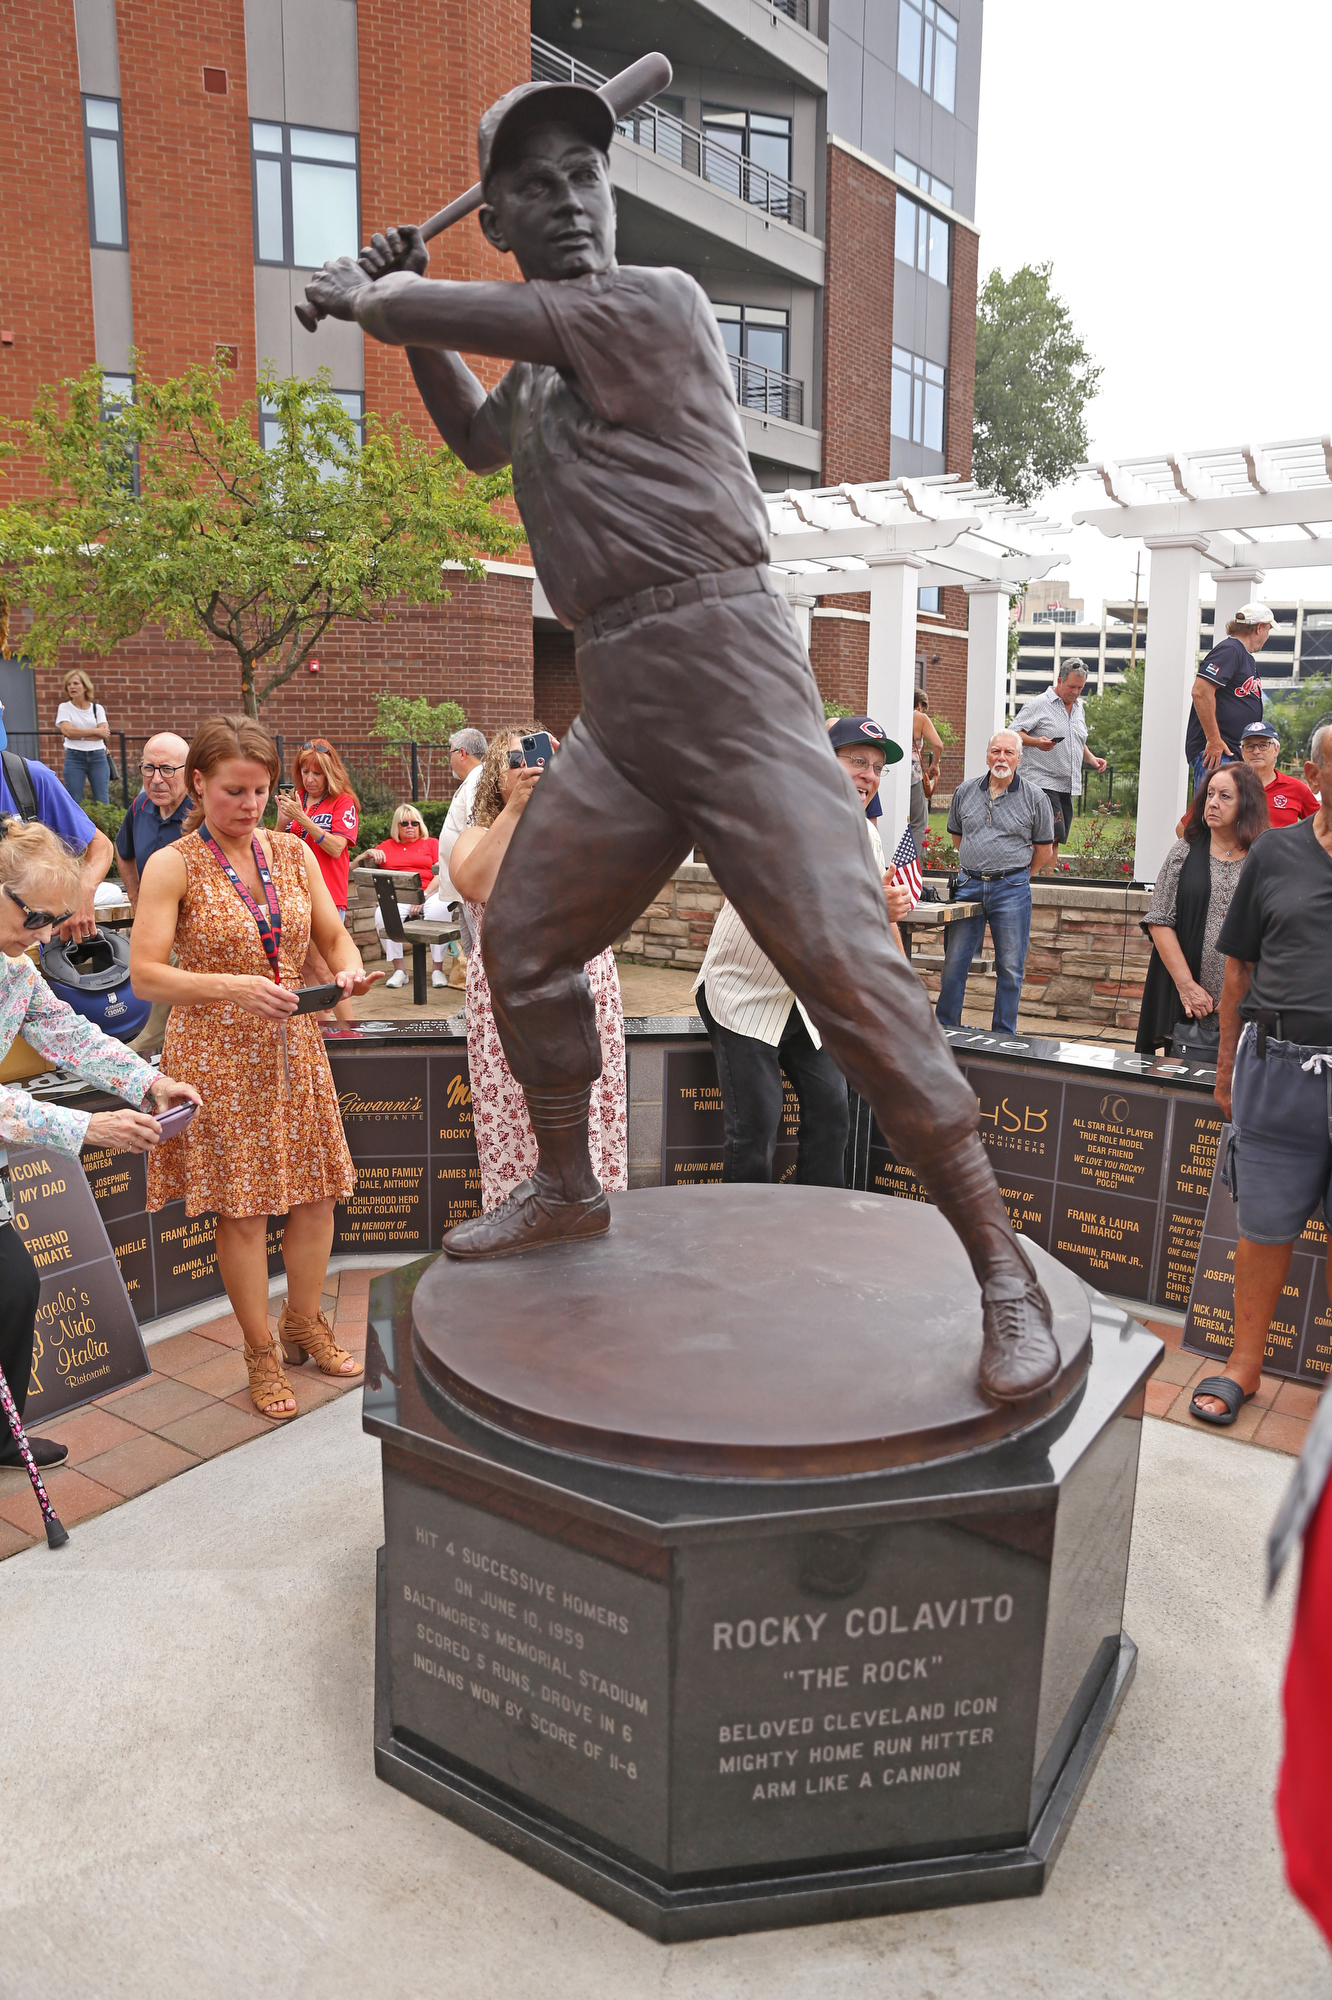 Cleveland Indians' legend Rocky Colavito honored with statue in